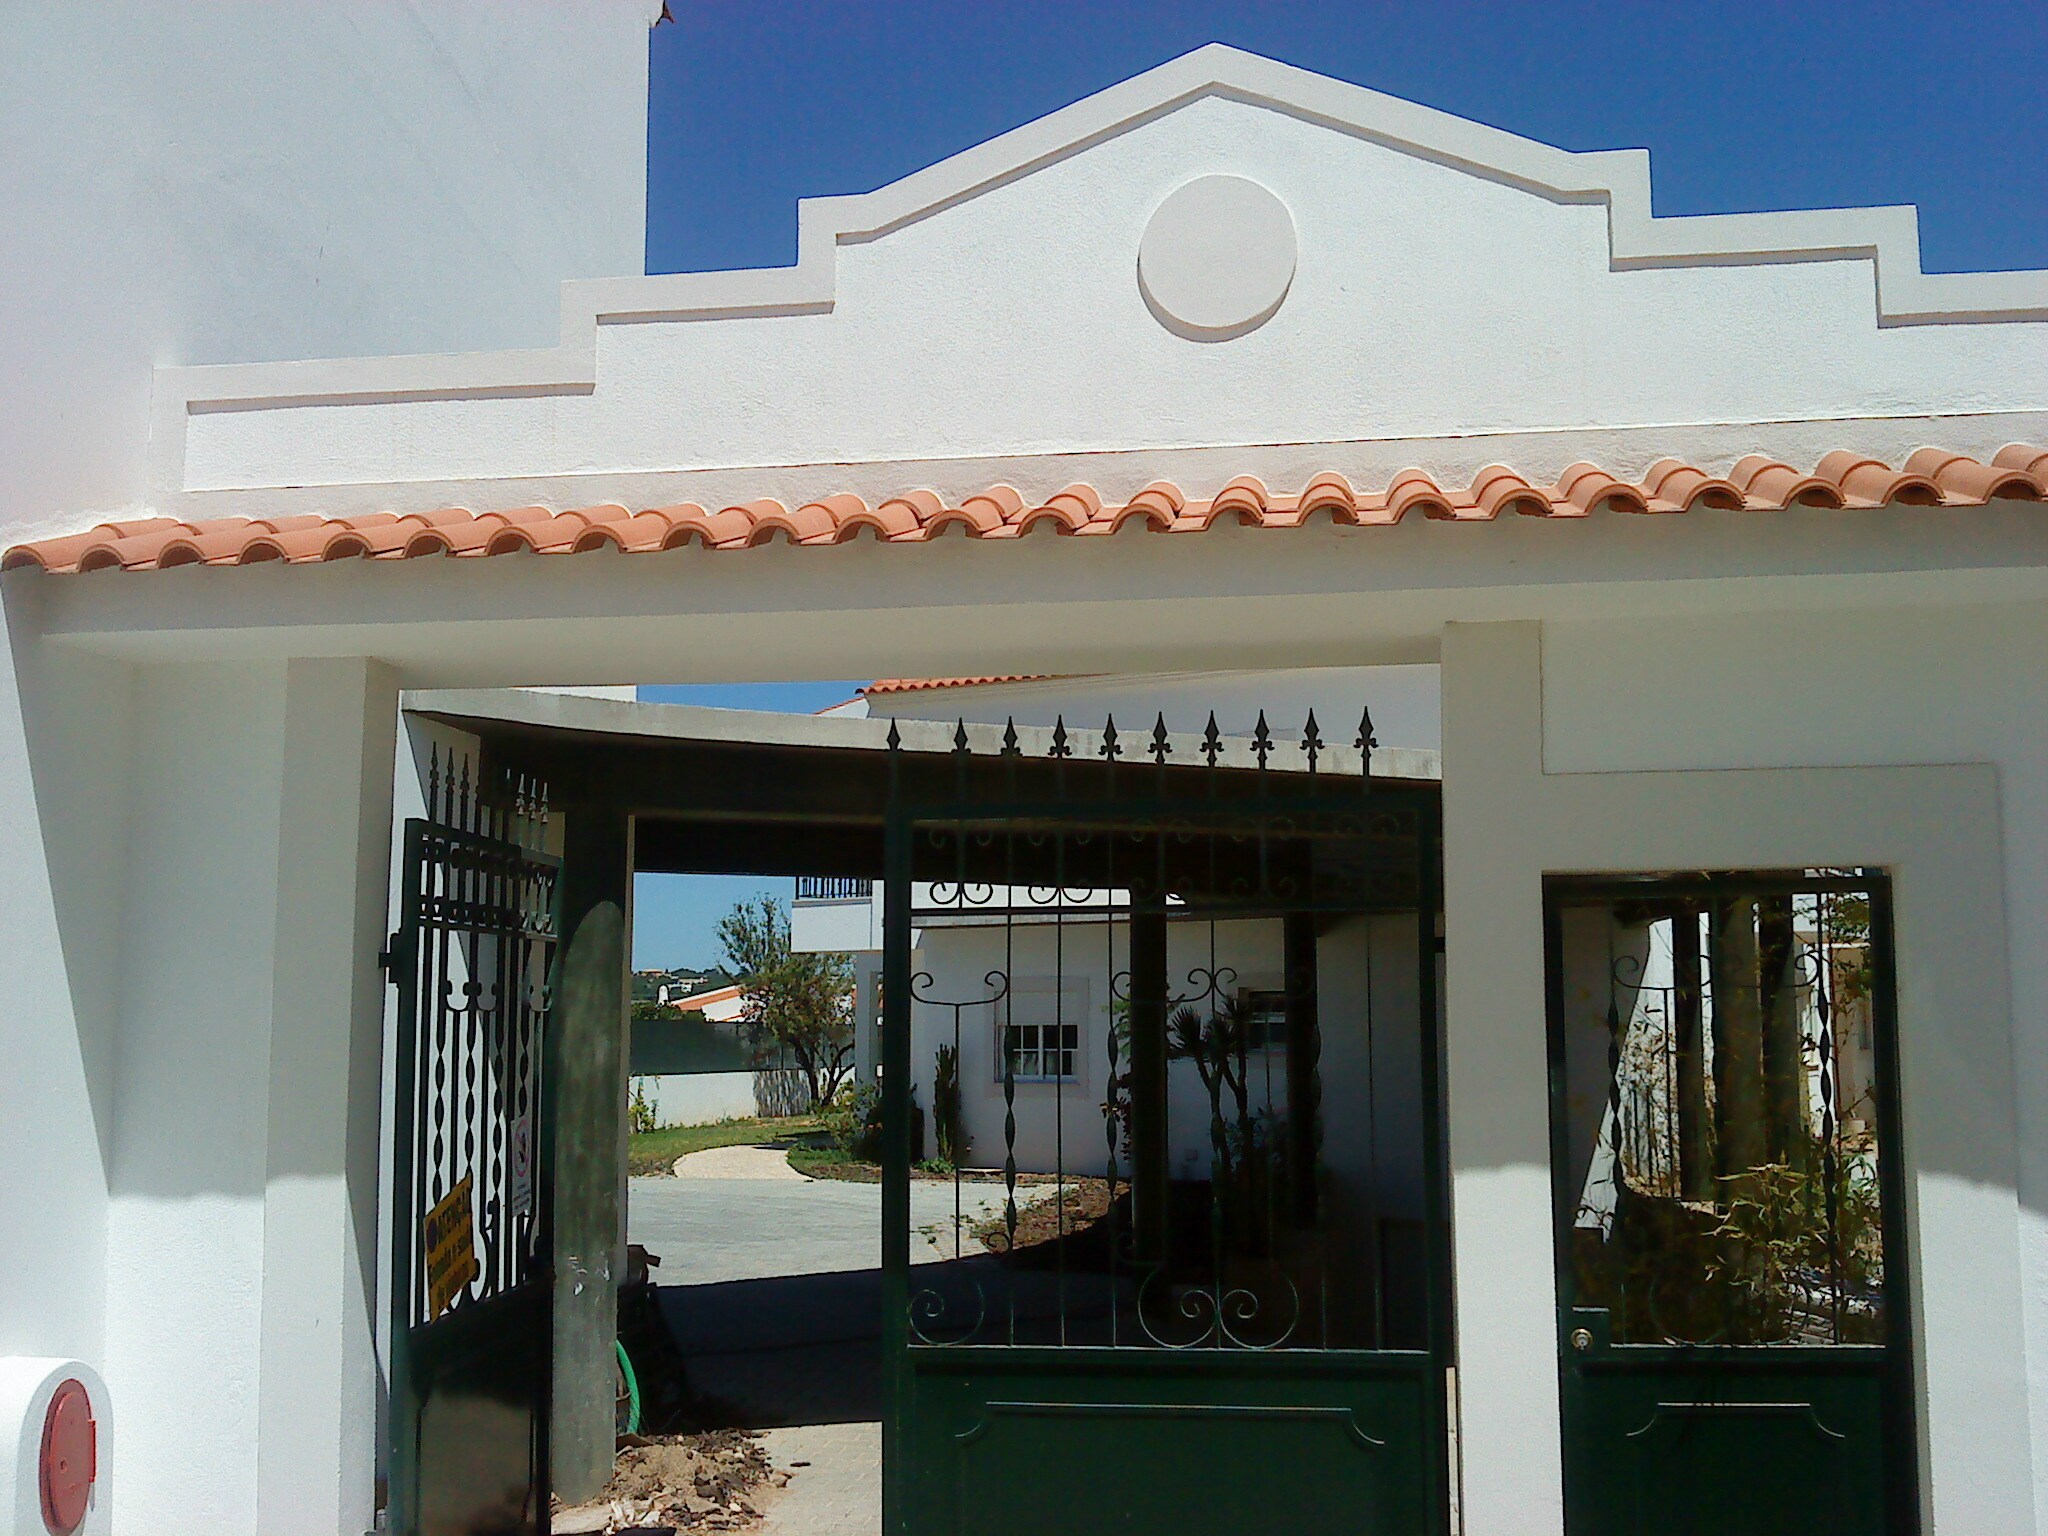 Property Image 2 - Albufeira 1 bedroom apartment 5 min. from Falesia beach and close to center! E